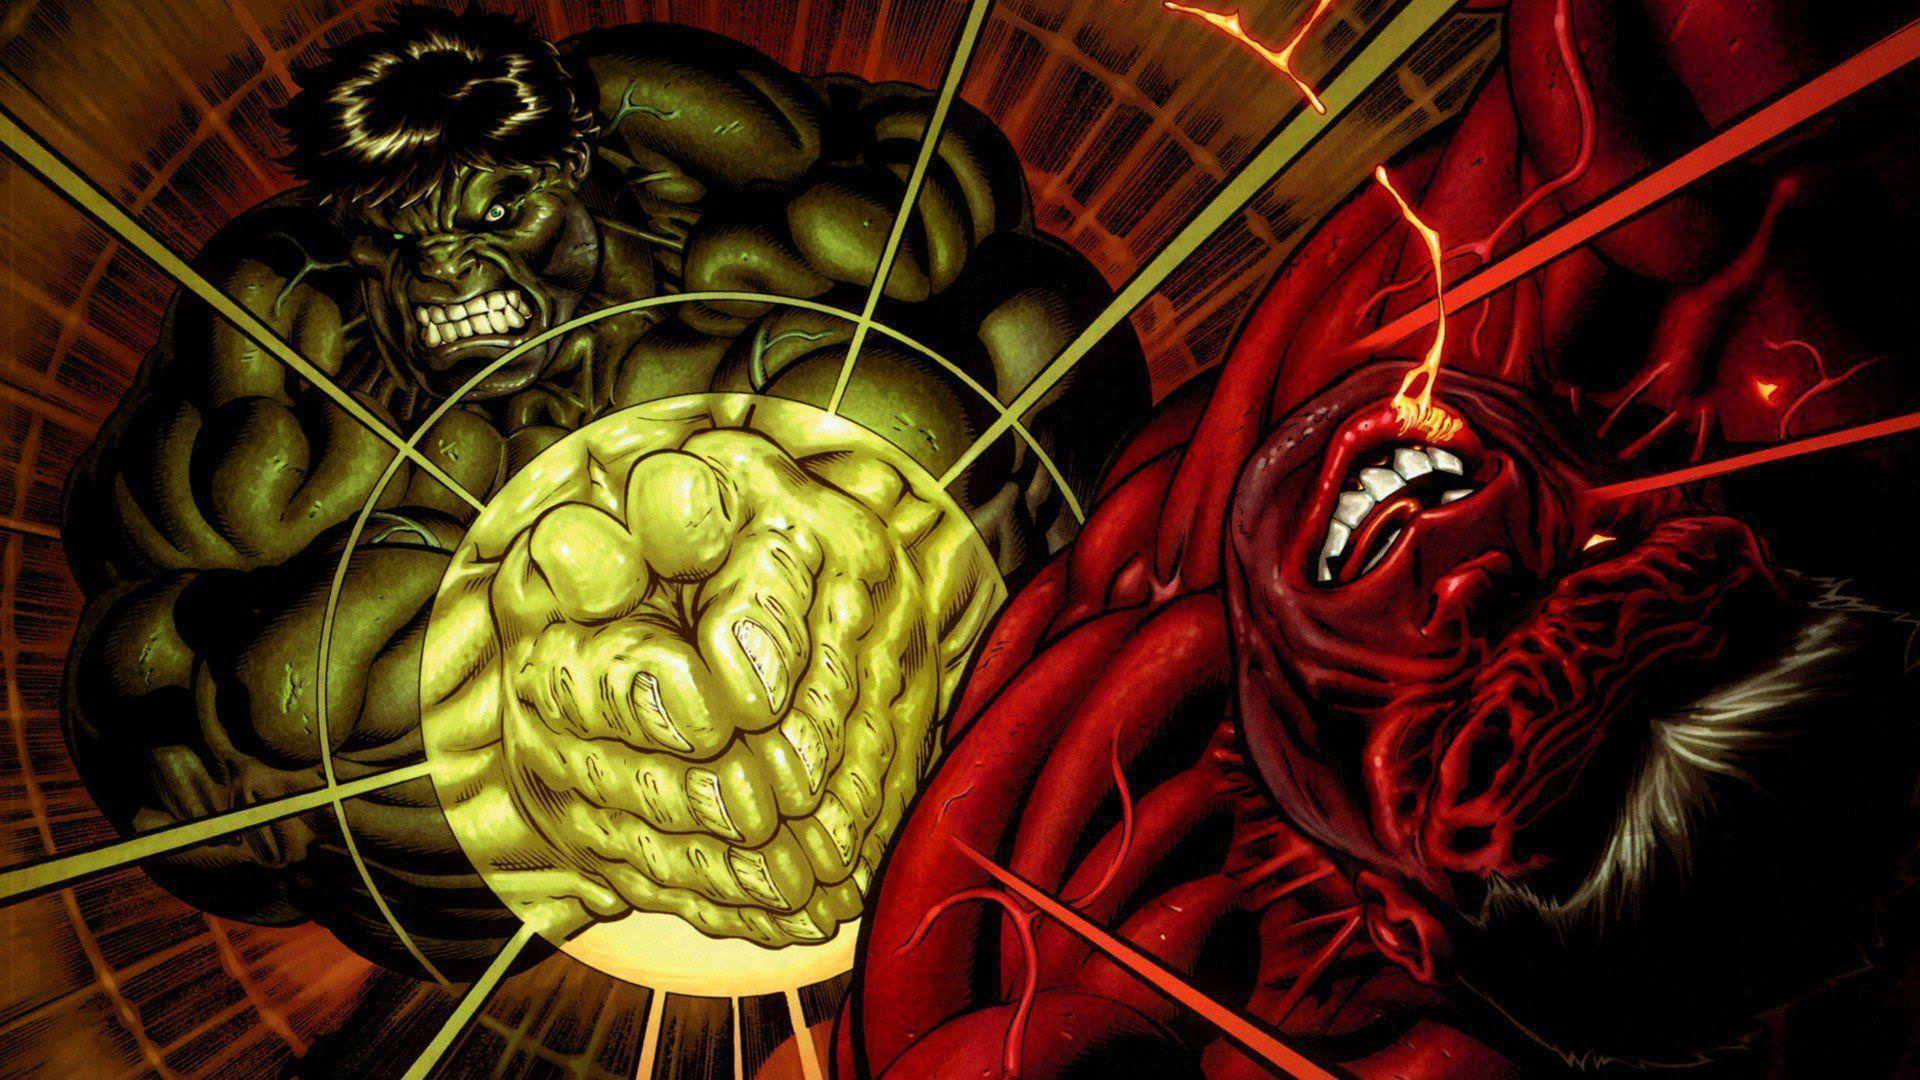 Download Red Hulk 4K Ultra HD Wallpapers For Android Wallpaper 